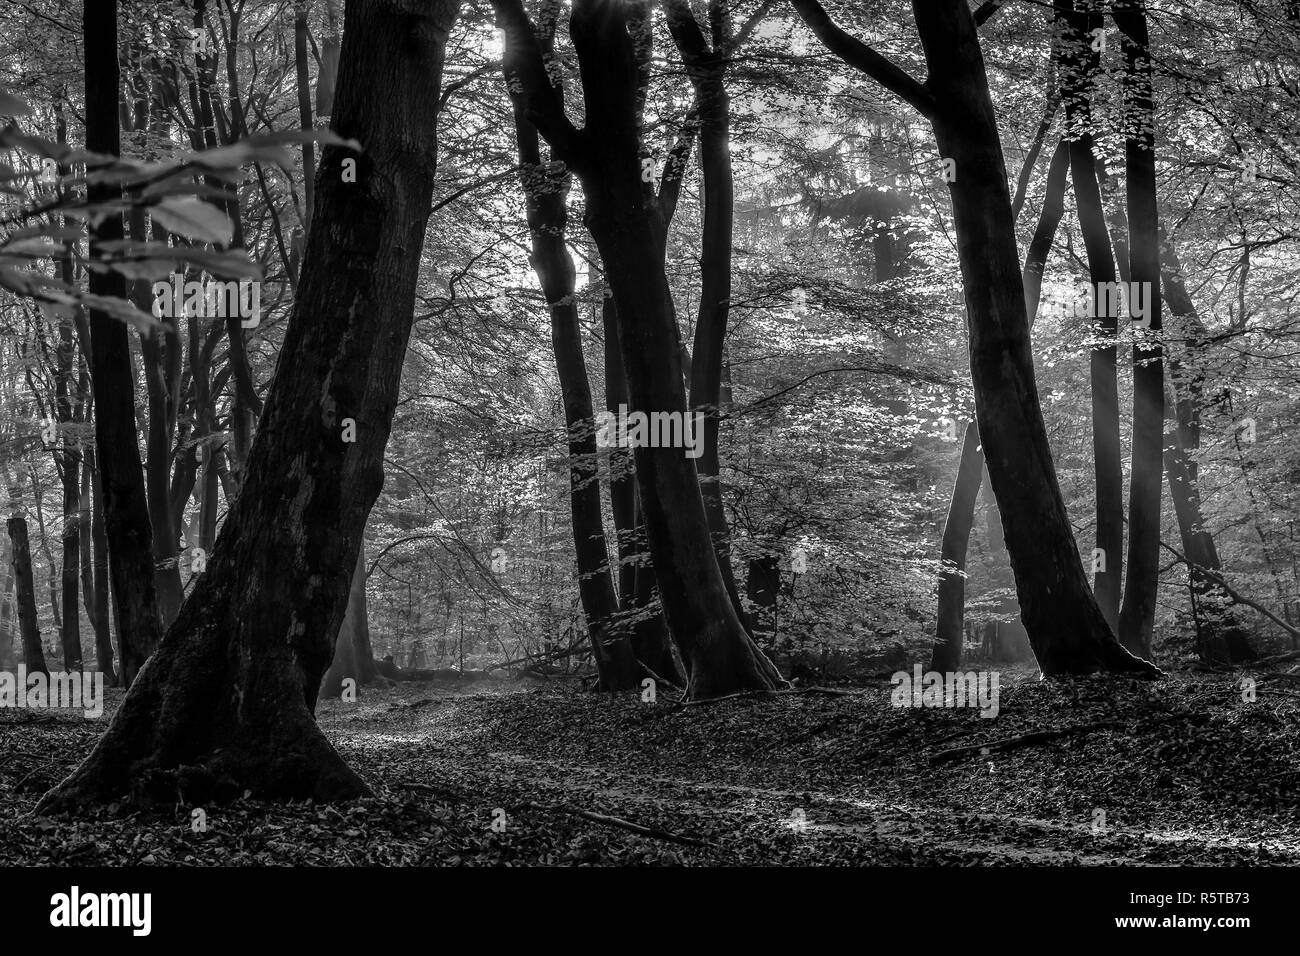 Speulderbos The 'dancing' trees Speulder- and Sprielderbos one of the oldest and most beautiful forests in the Netherlands. Stock Photo